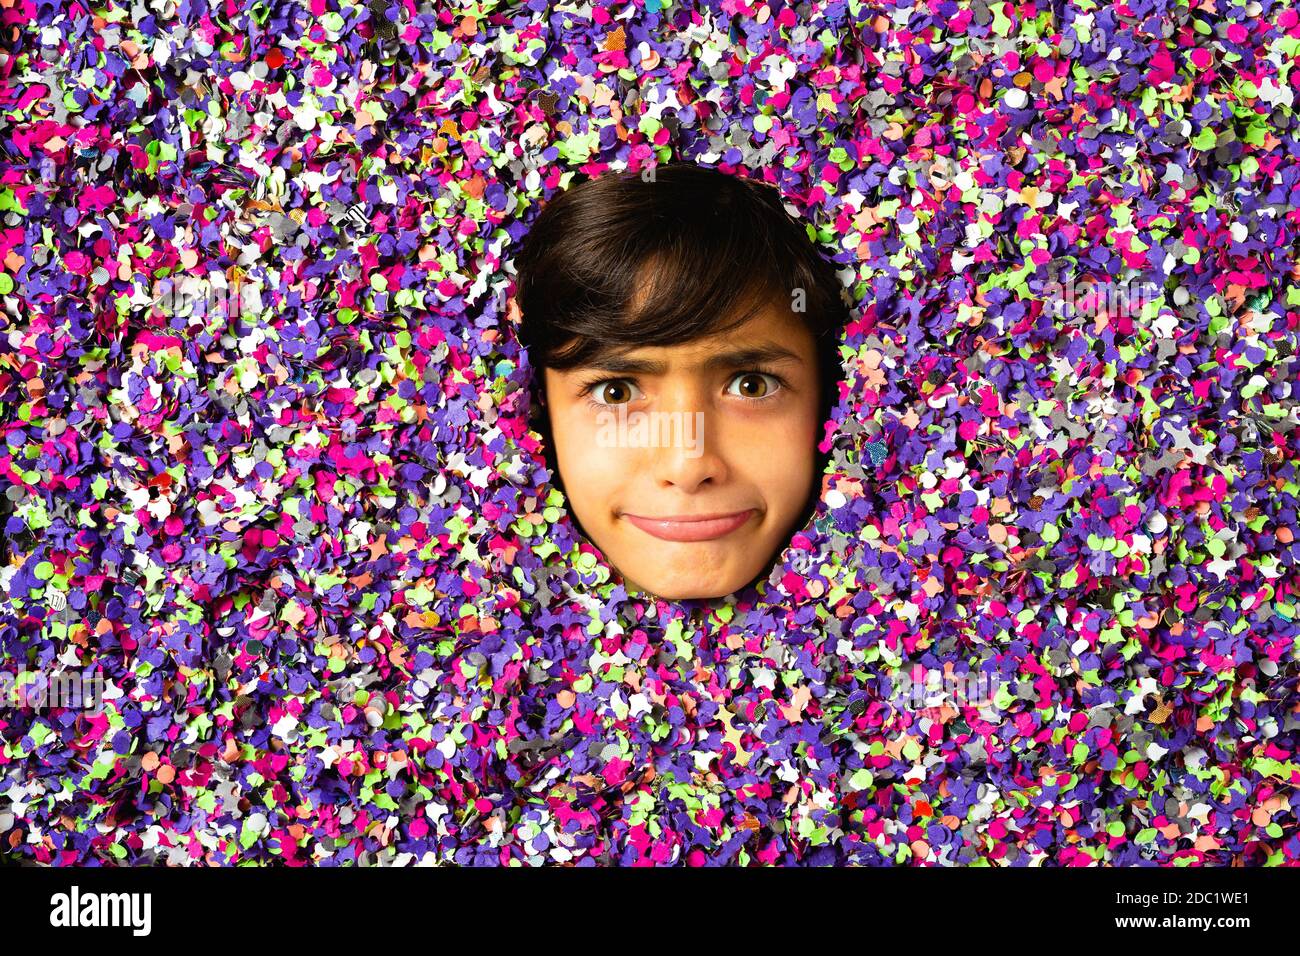 Young boy face making grimaces and being surrounded by colored confetti Stock Photo